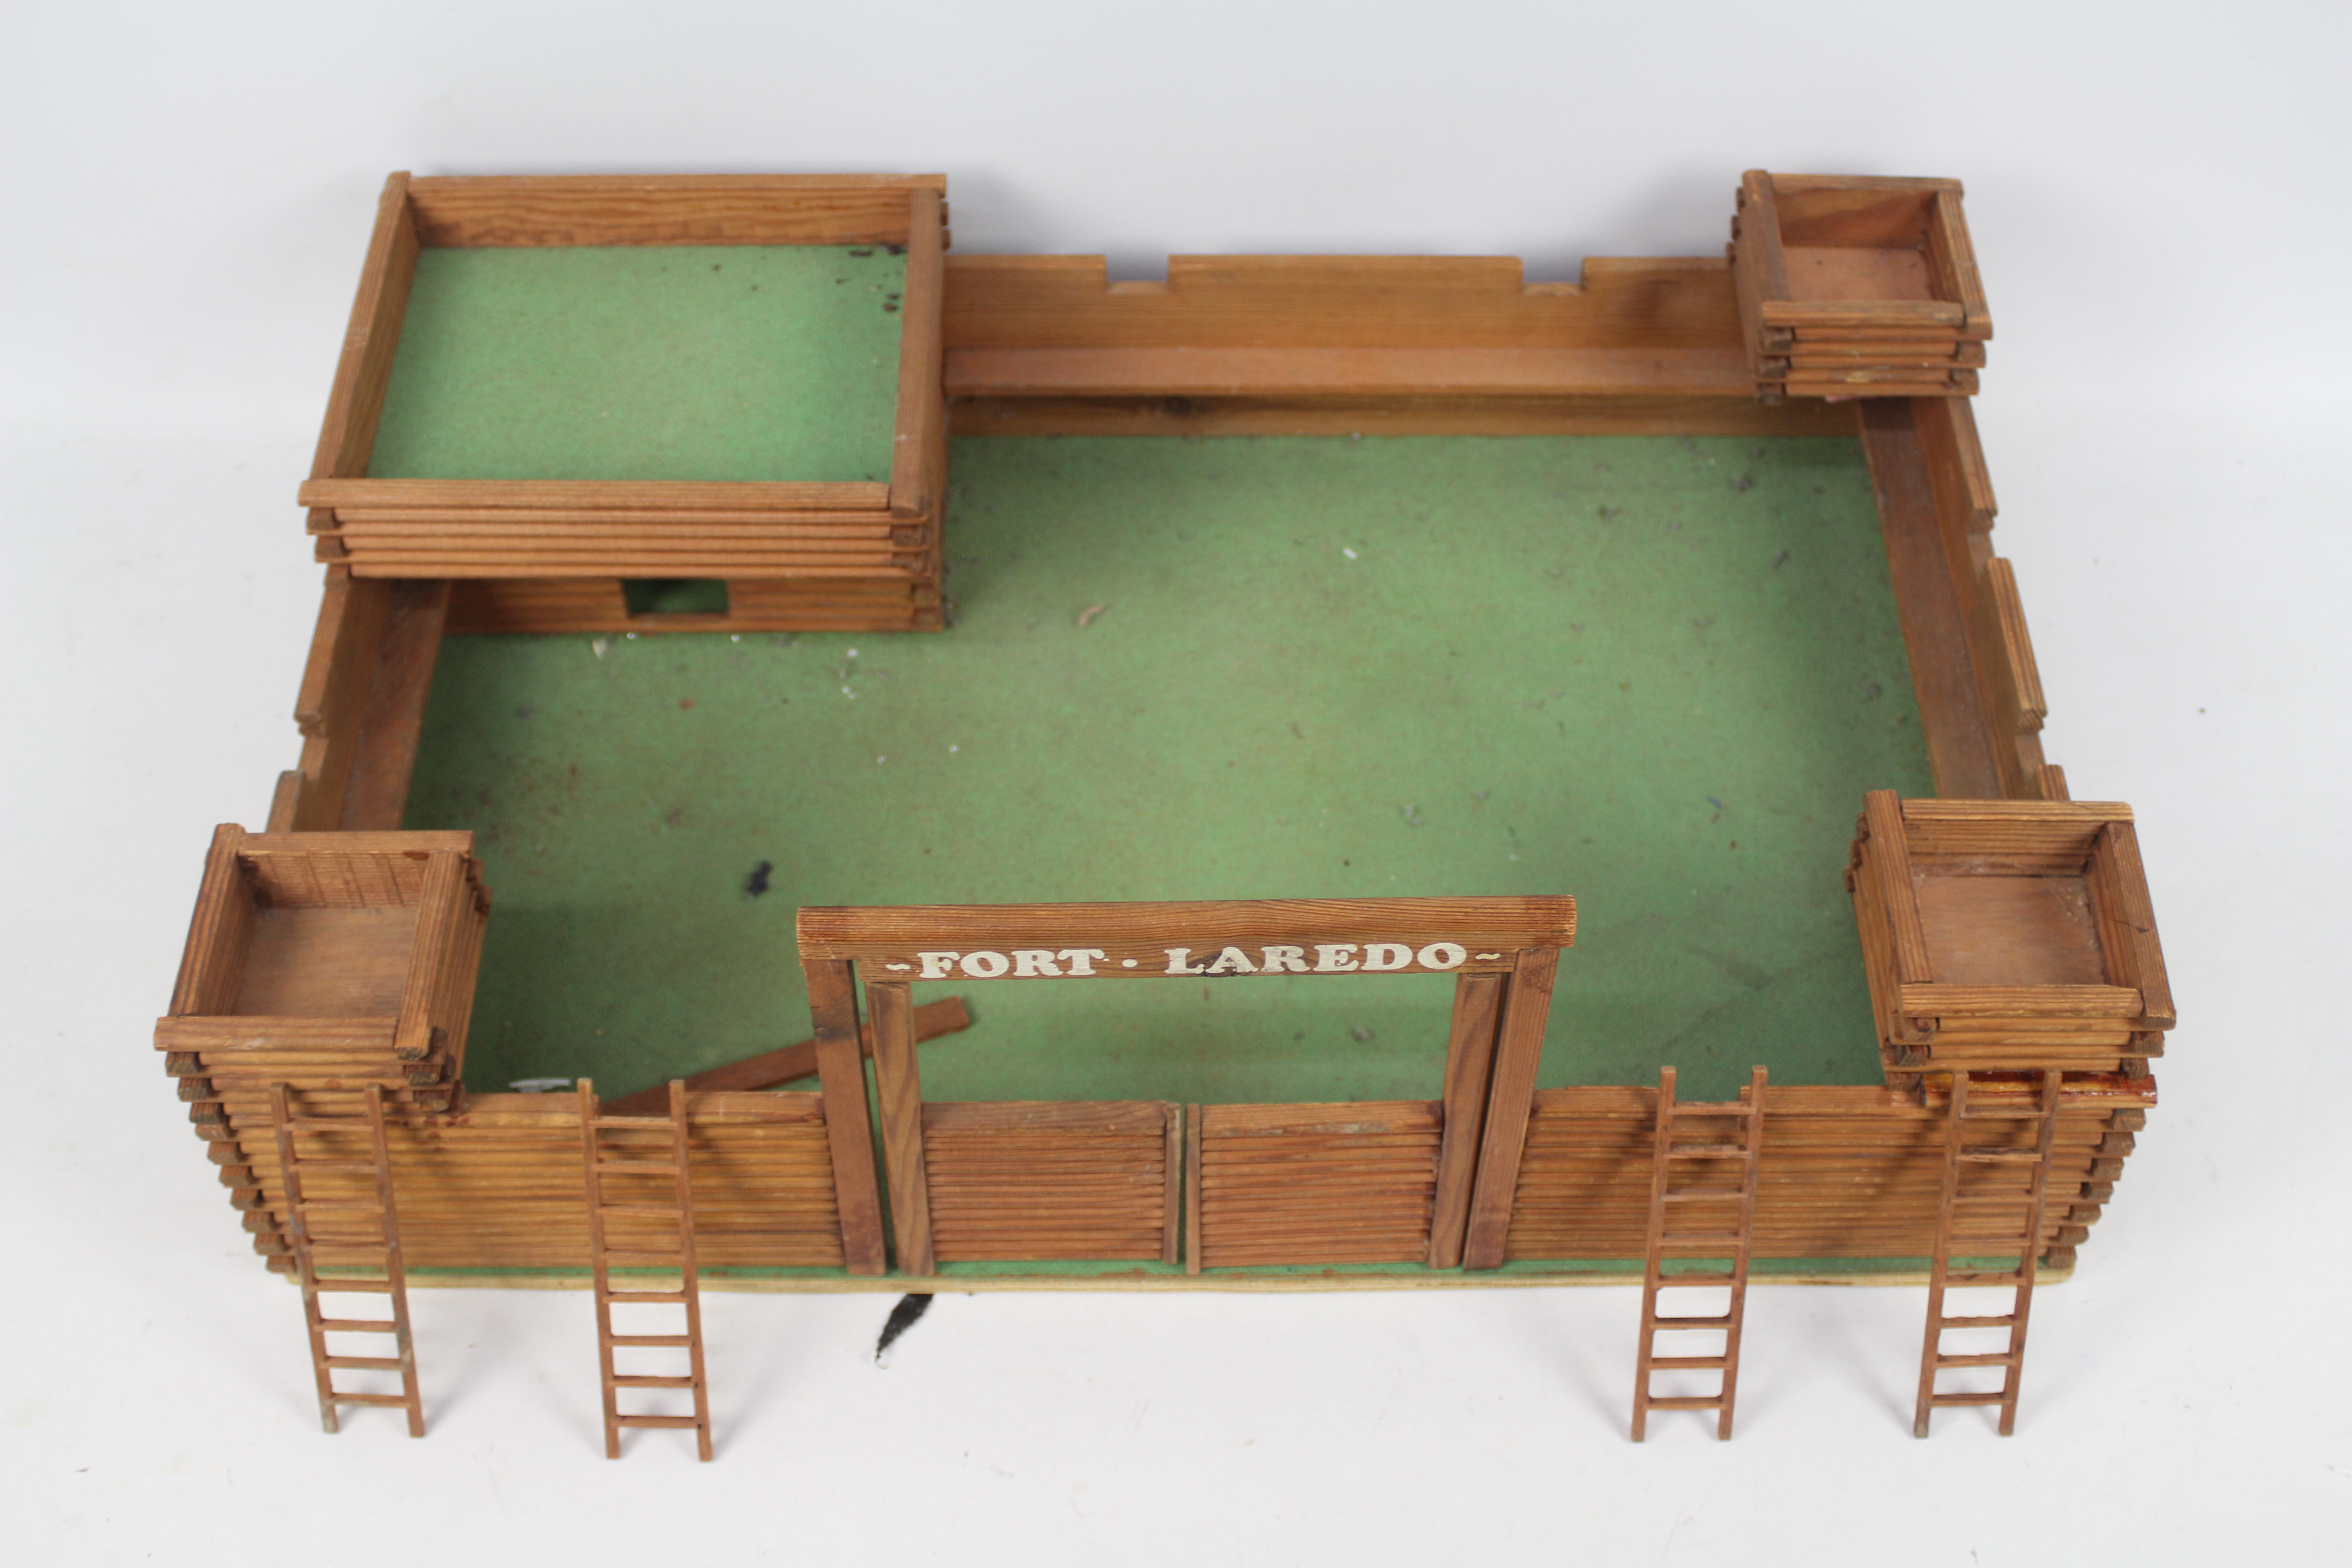 Hanse (Denmark) - A vintage unboxed wooden toy fort ' Fort Laredo' by the Danish manufacturer Hanse.